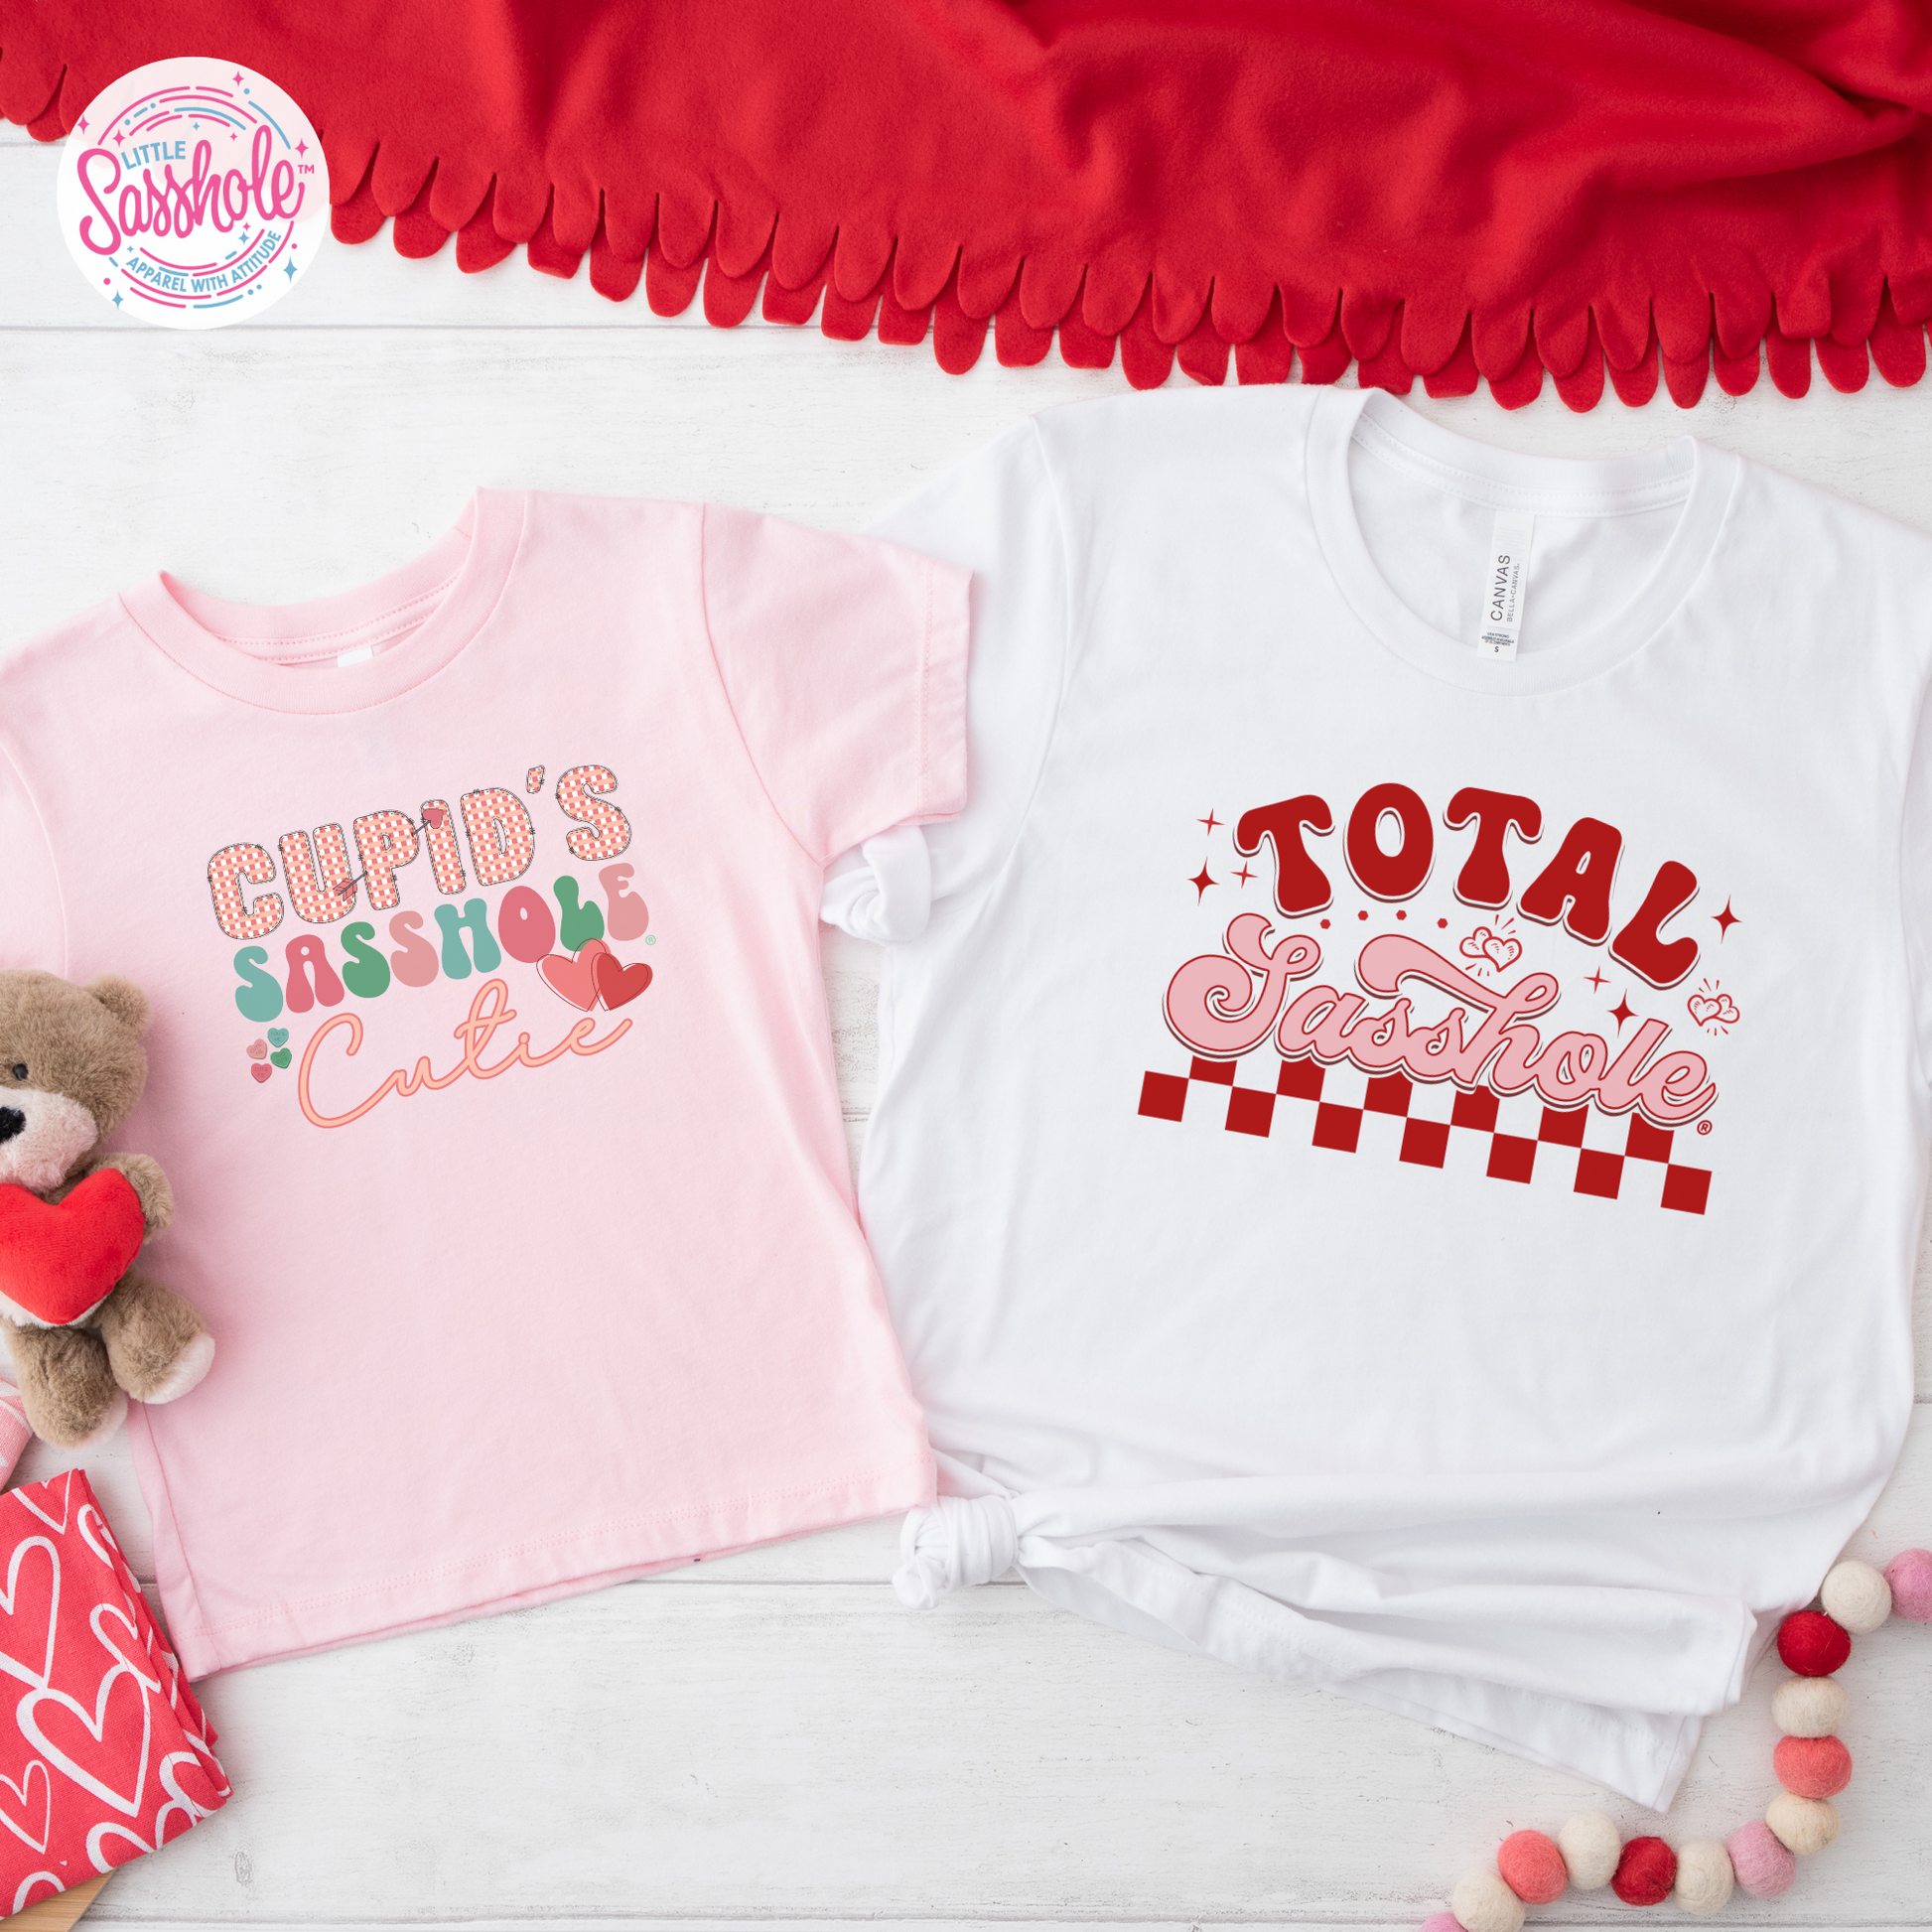 Valentine's wardrobe for toddlers, Valentine's fashion for little ones, Valentine's Day toddler style, Valentine's cuteness for toddlers, Valentine vibes toddler tee, Valentine toddler shirt, Valentine princess tee, Valentine joy for toddlers, Toddler girl's love-themed clothing, Toddler fashion for the love season, Toddler fashion for love season, Toddler cupid t-shirt, Toddler cupid in action tee, Toddler cupid fashion, T-shirts, Sweetheart toddler girl style, Sweetheart toddler girl apparel